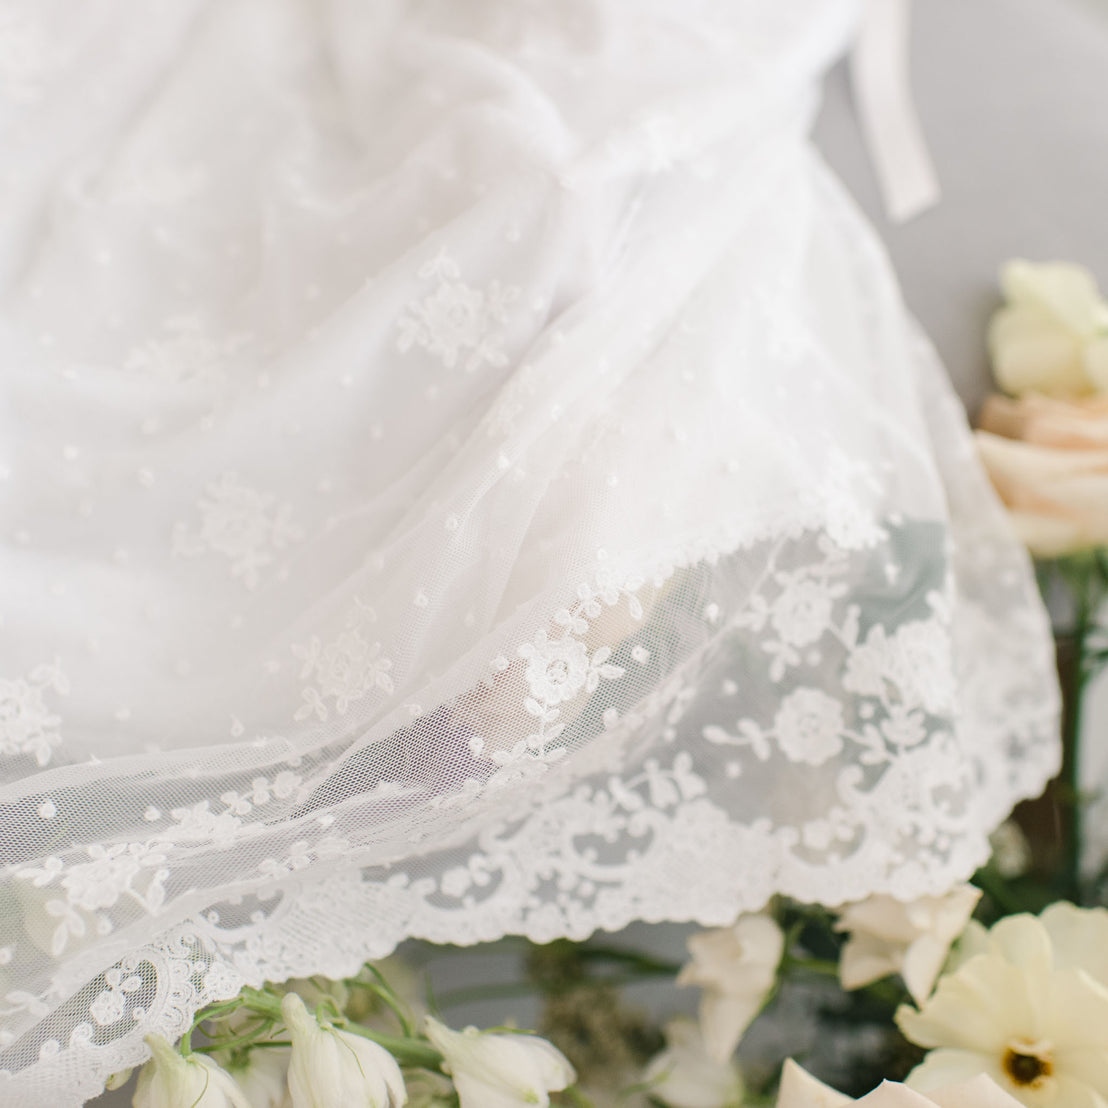 Close-up of a delicate white Melissa Romper Dress with floral lace details, set against a soft backdrop of pale flowers. The focus is on the intricate fabric and elegant design.